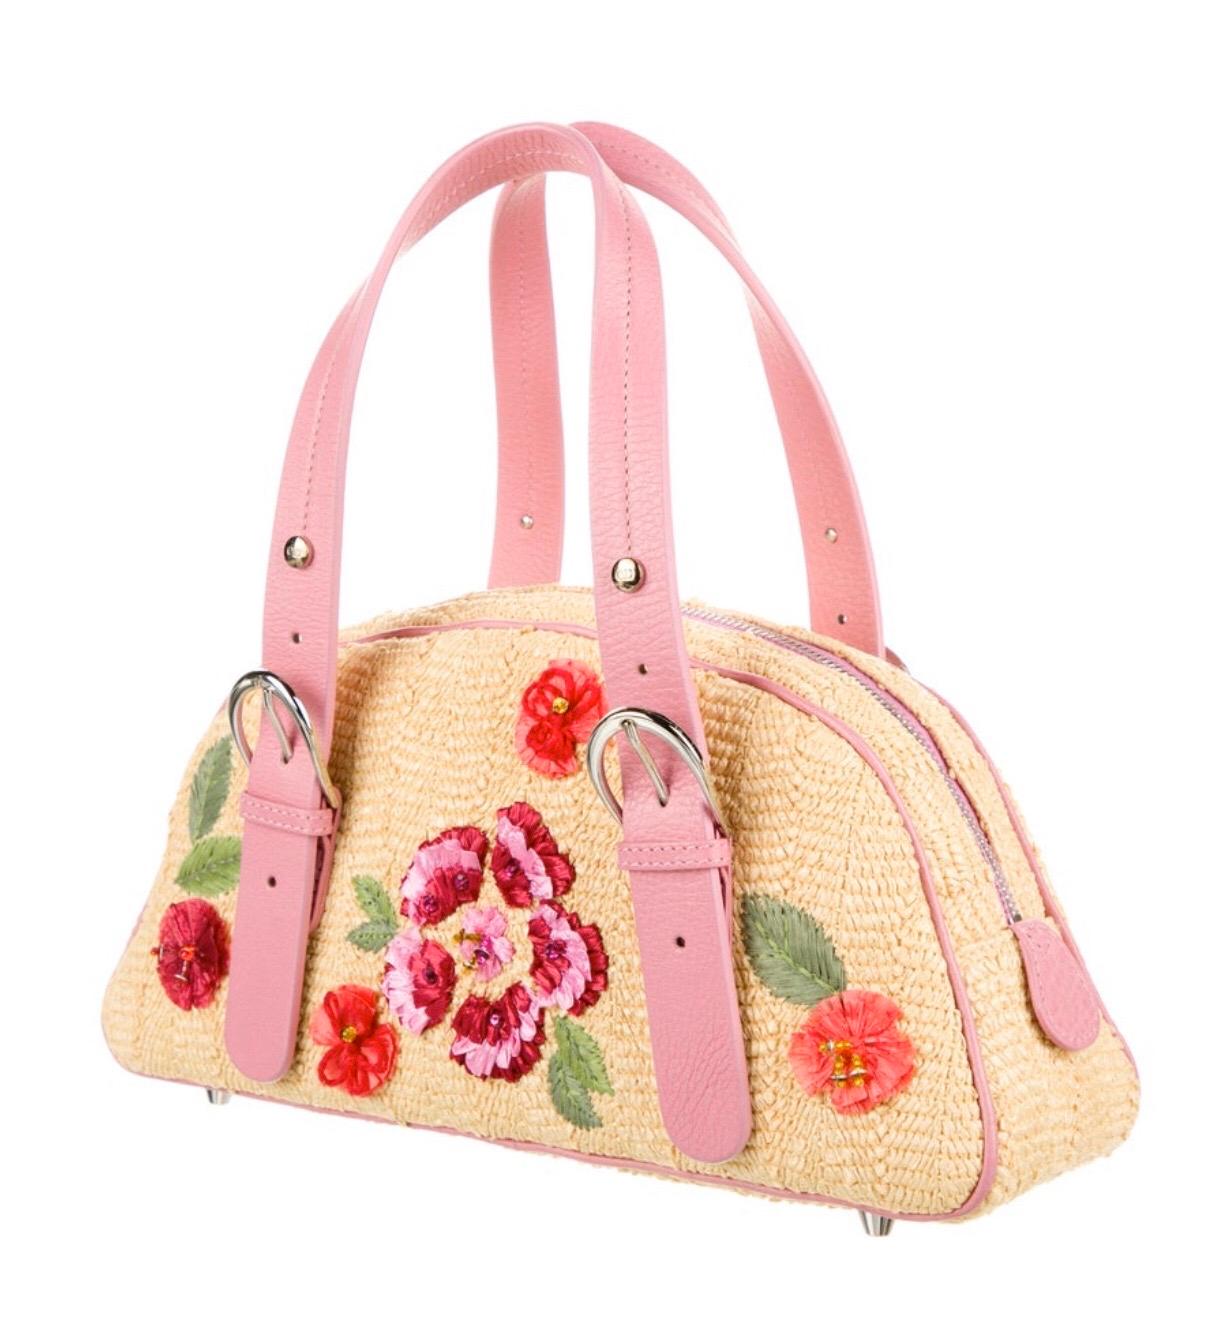 Christian Dior by Galliano straw handle bag with pink leather trim. Floral appliques. Condition:  Excellent. Looks new. 